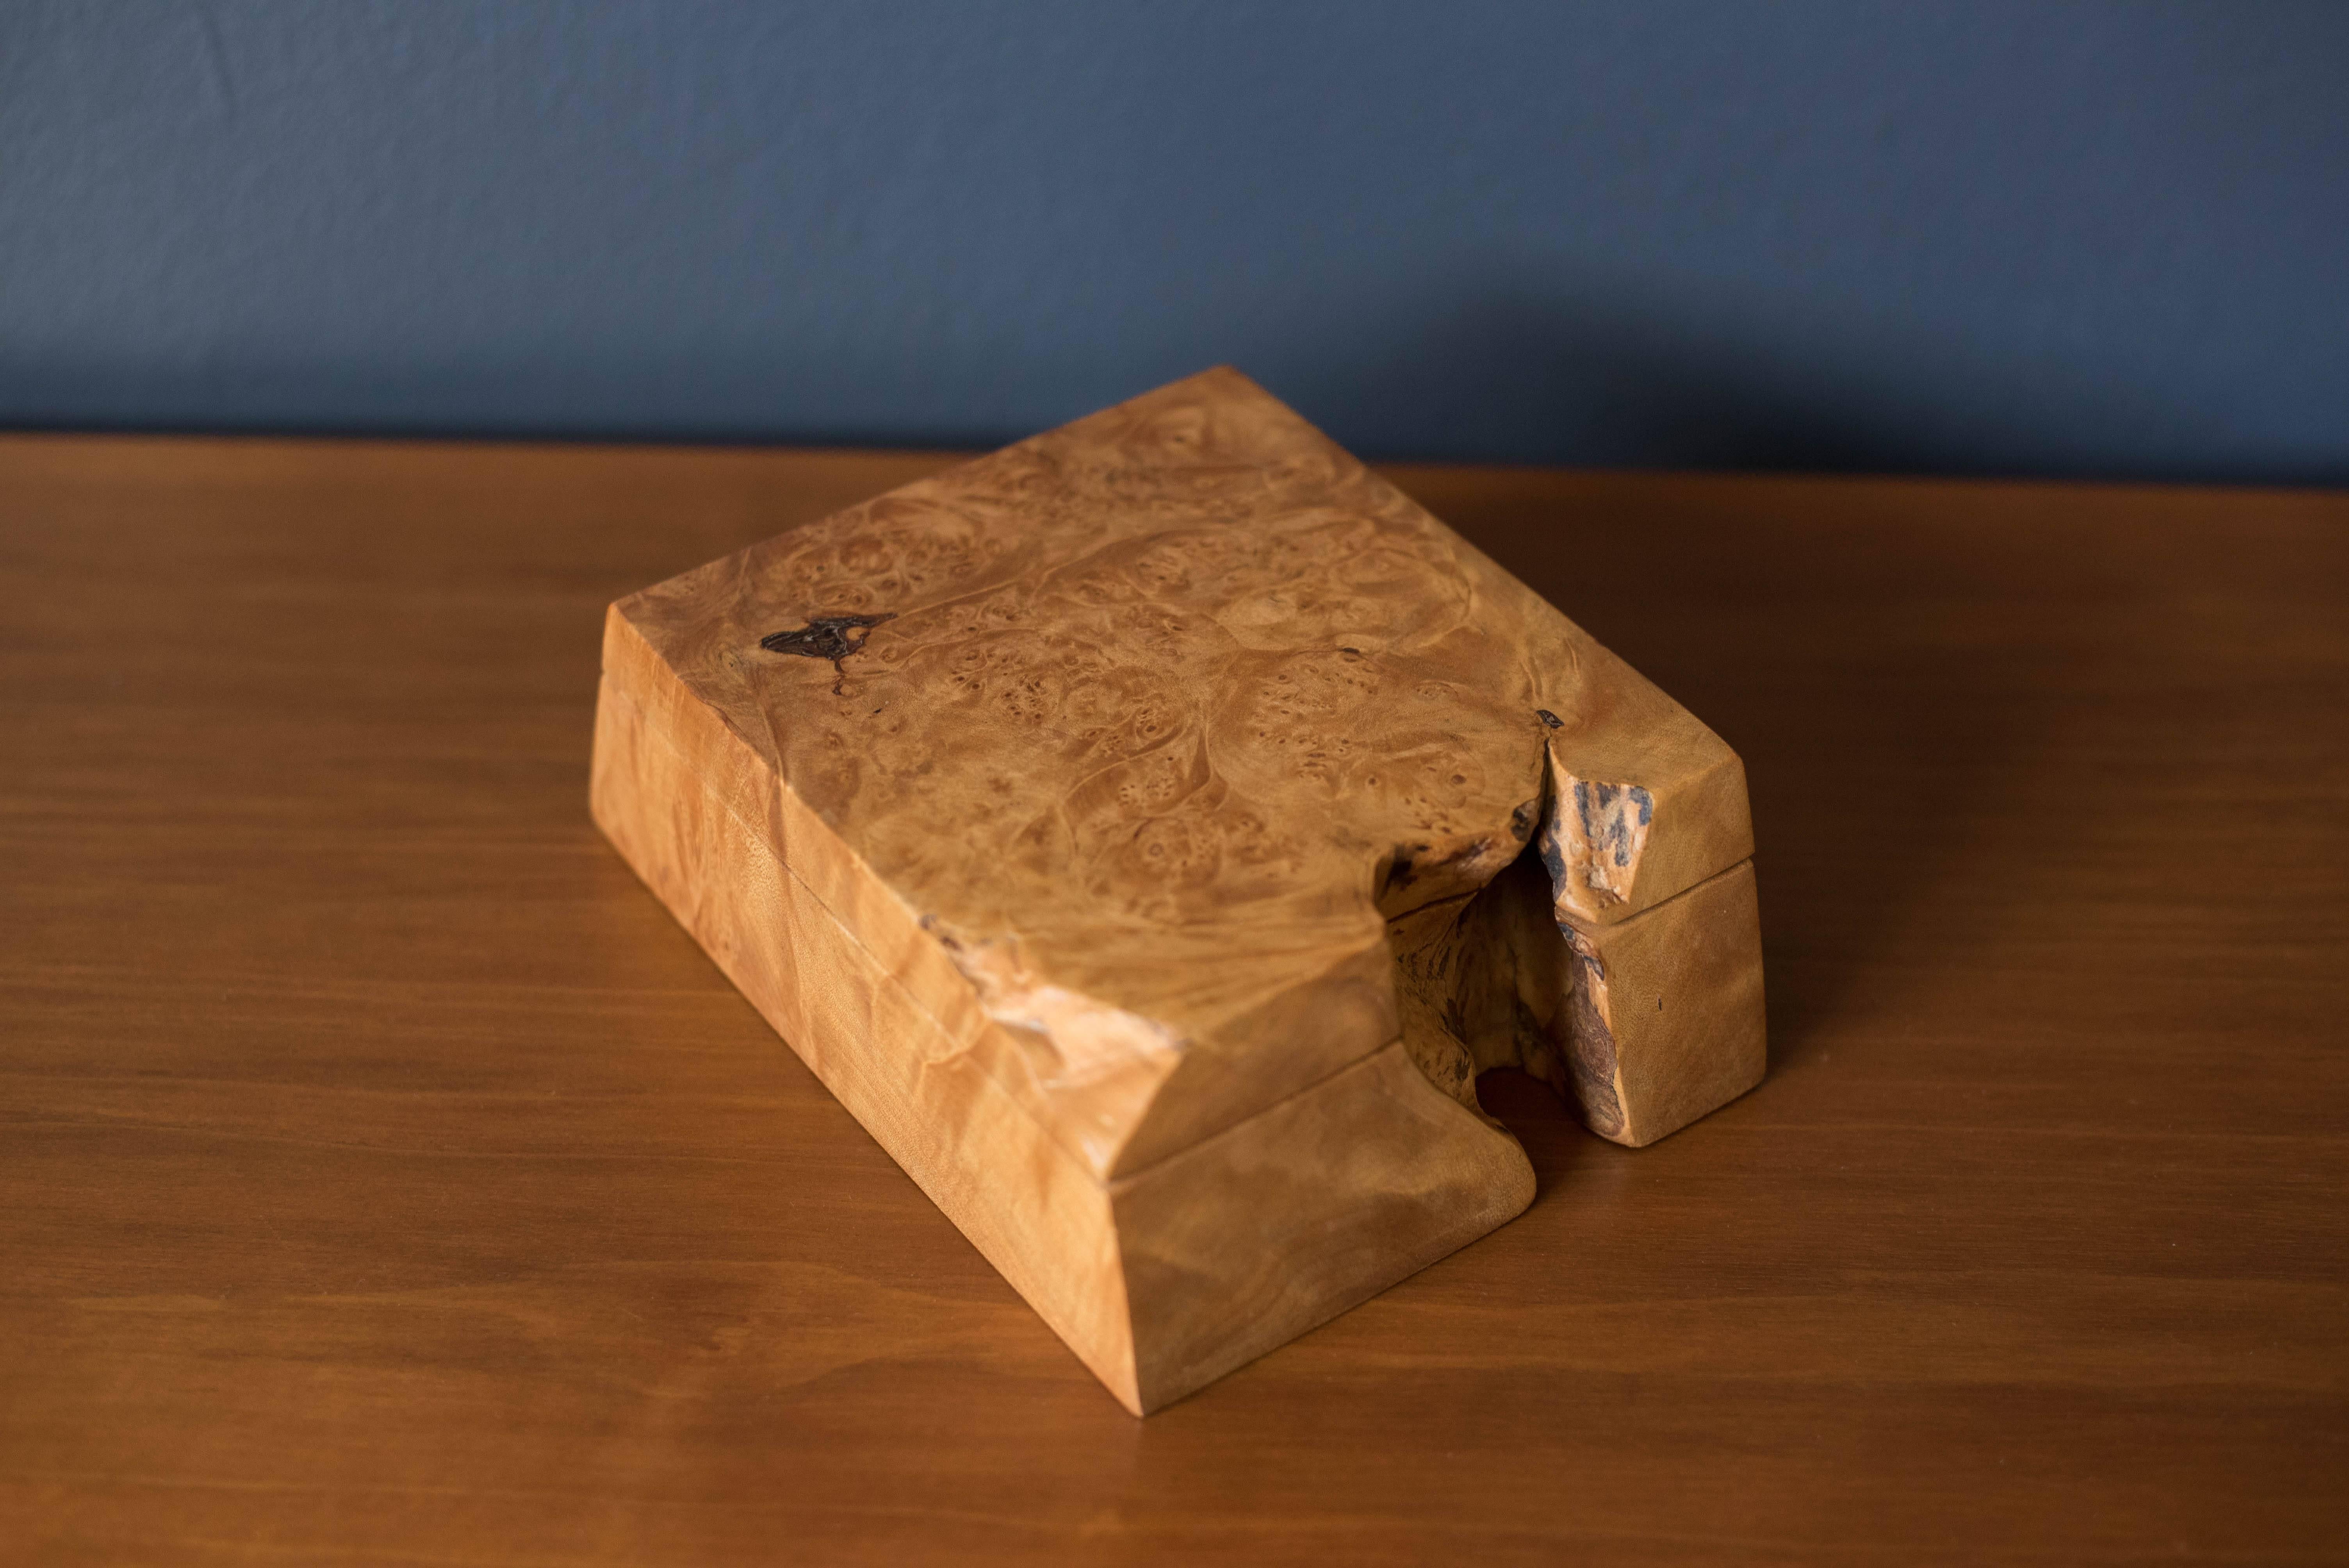 American Studio Craft jewelry or stash box by woodworker Michael Elkan. This piece features a live edge organic shape and is made of olive burl wood.

